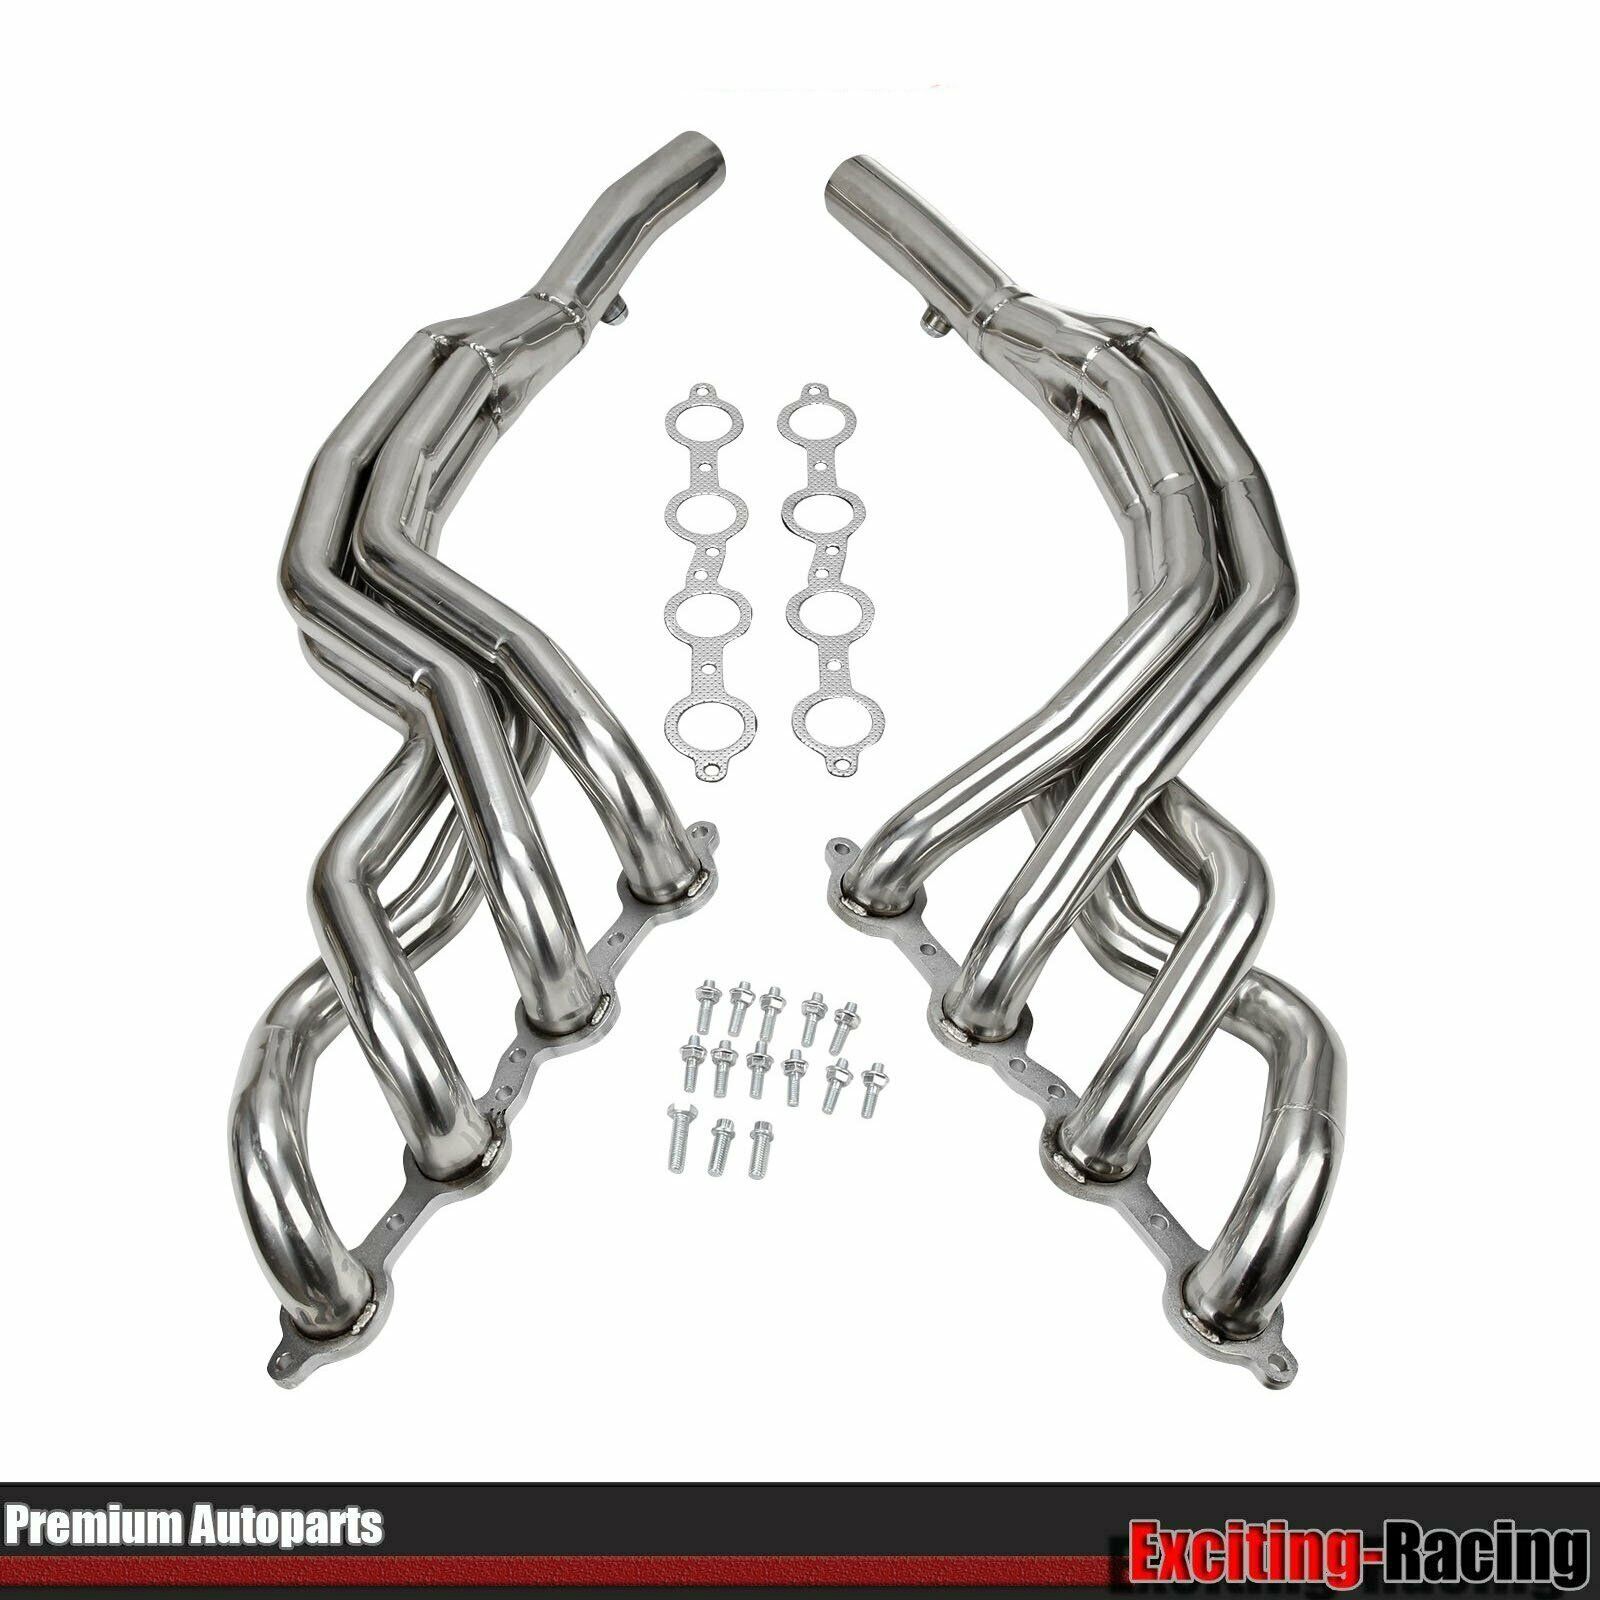 For Chevy Camaro SS 6.2L V8 Stainless Long Tube Headers Manifolds 2010-2015